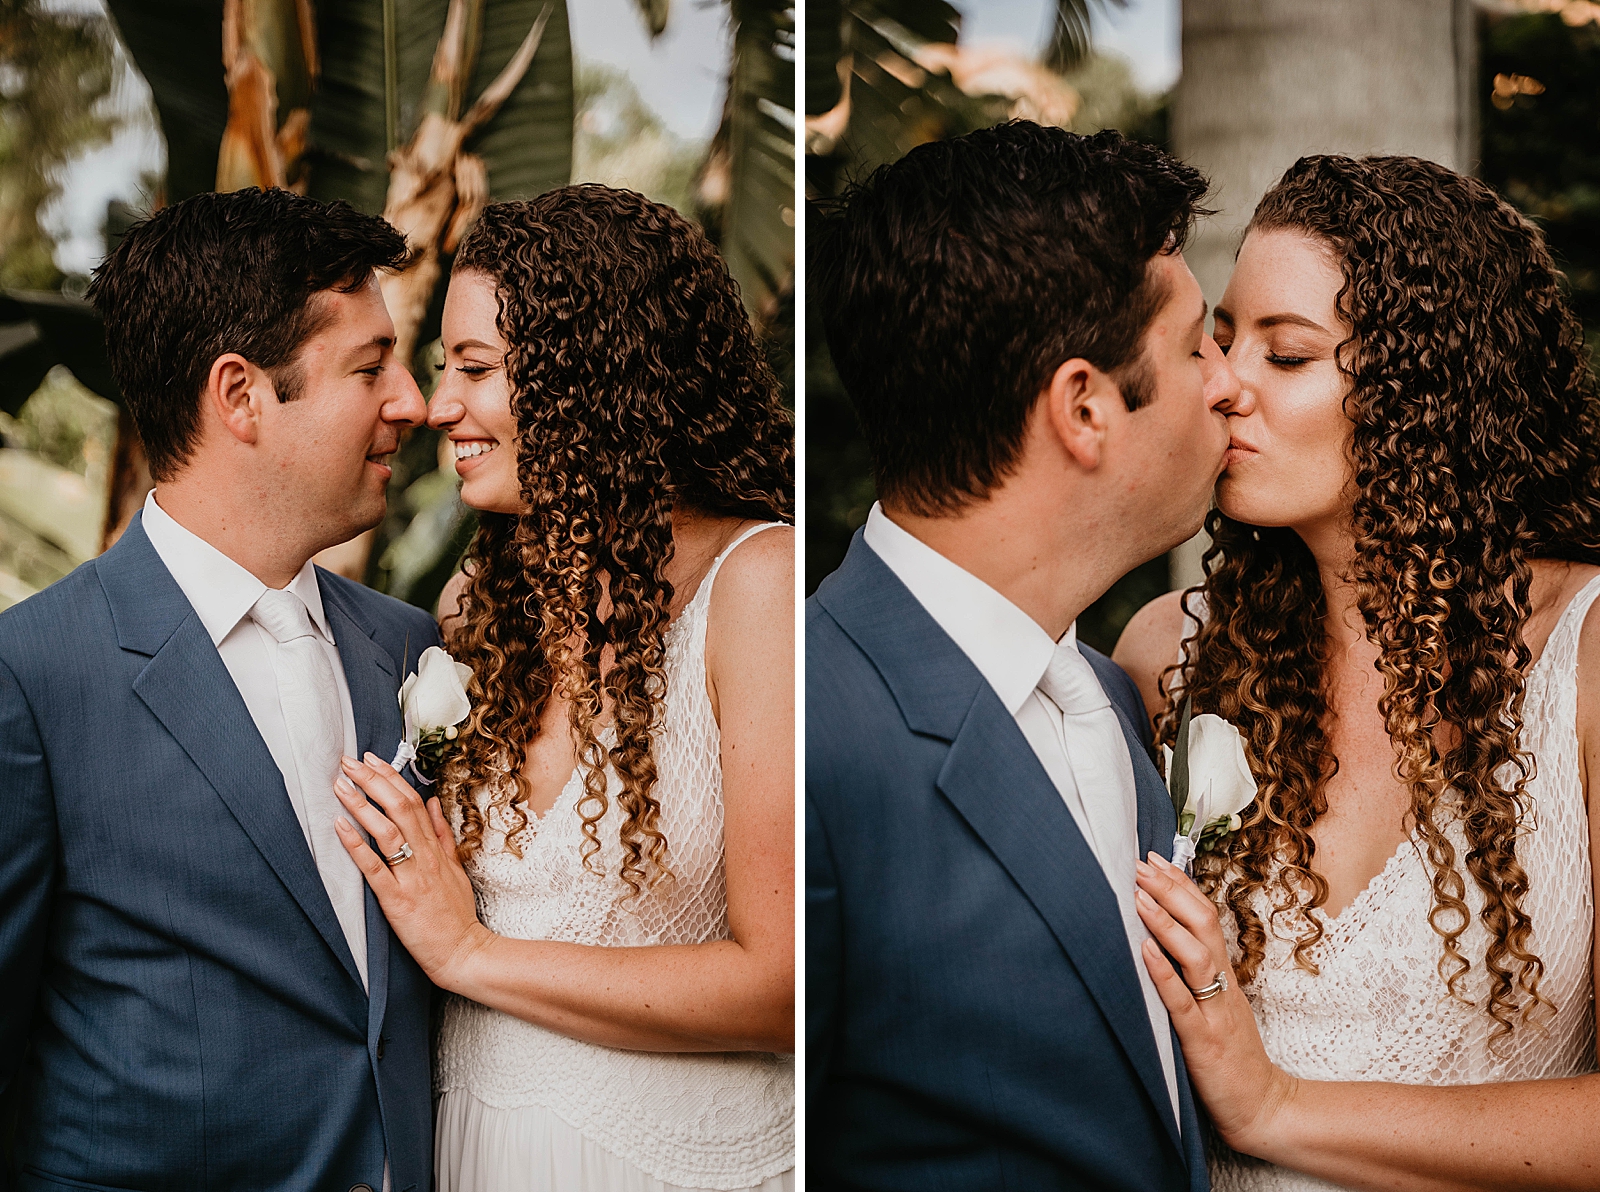 Bride and Groom touching noses and kissing Intimate South Florida Wedding Photography captured by South Florida Wedding Photographer Krystal Capone Photography 